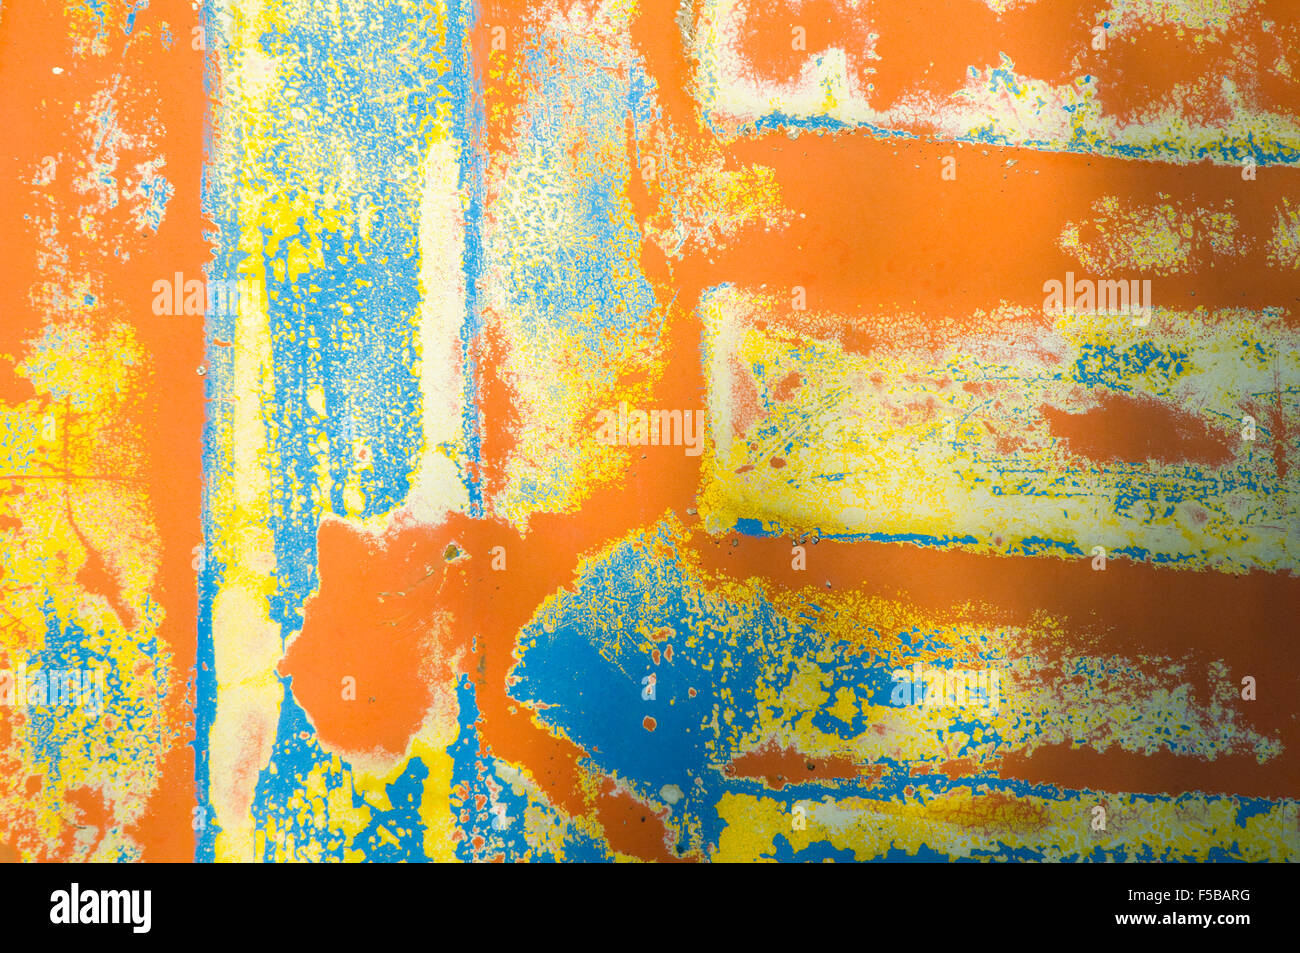 Apstract image of weathered paint Stock Photo